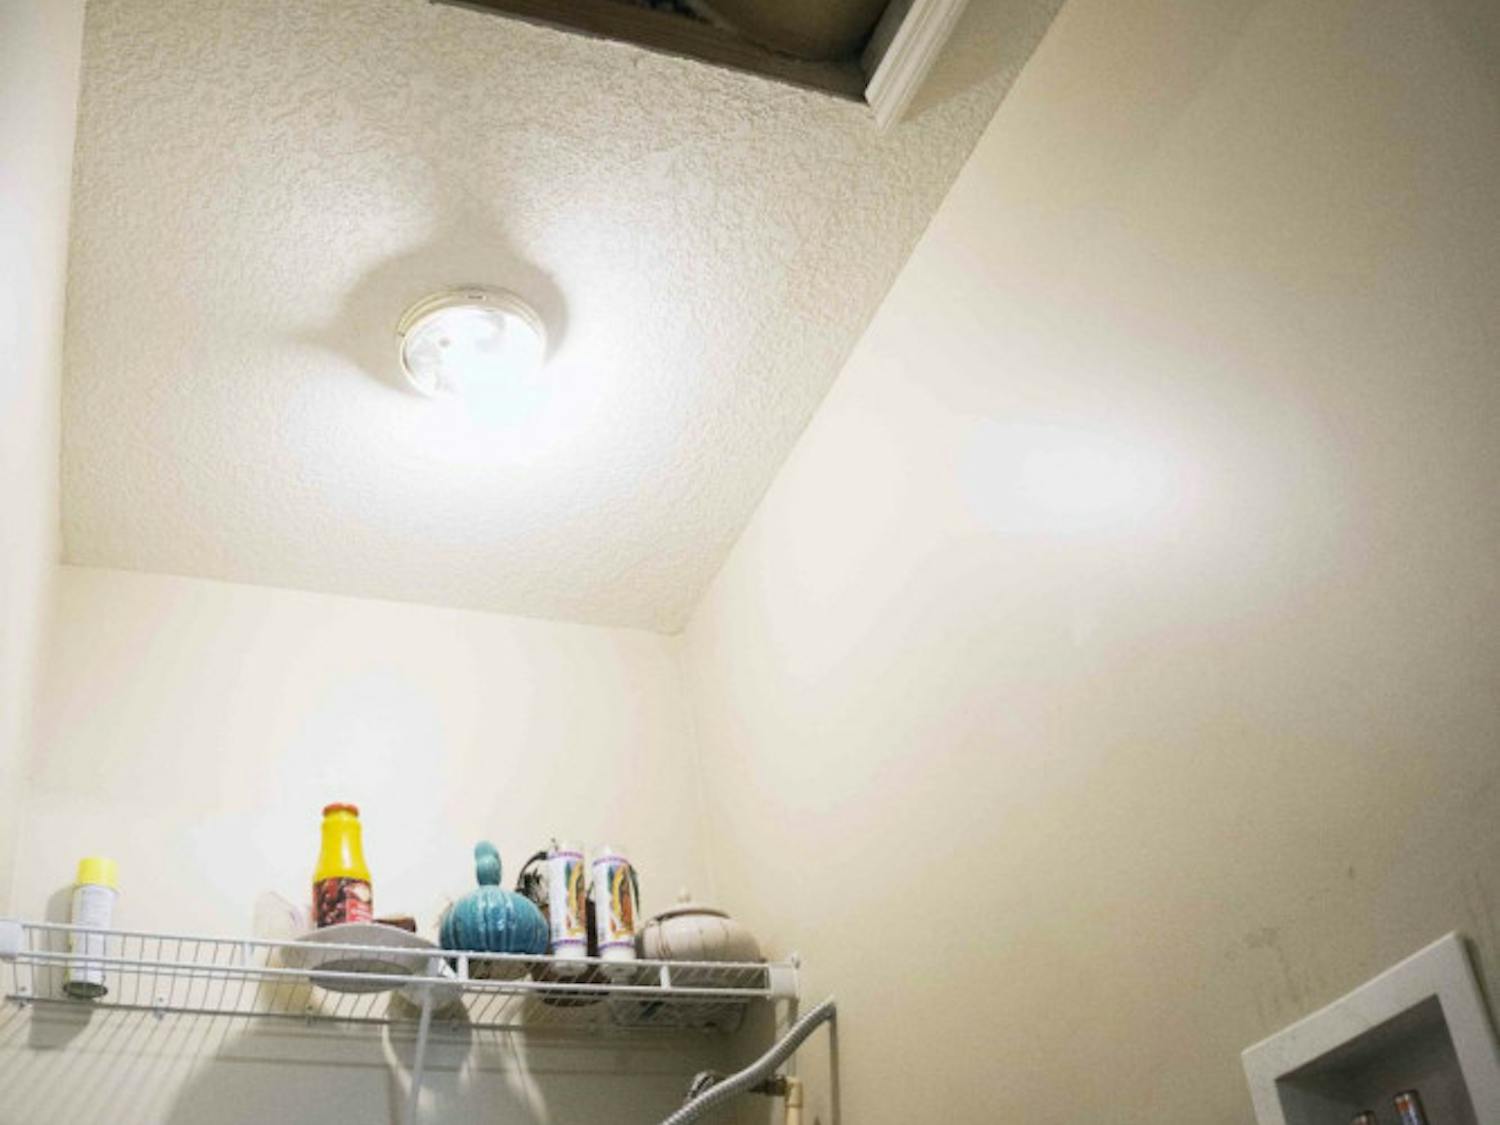 Pictured is the opening to the attic in Ifeyiek Akanni's home, where fugitive Victor Lamar Cruger reportedly hid while authorites searched the house Aug. 28, 2015.